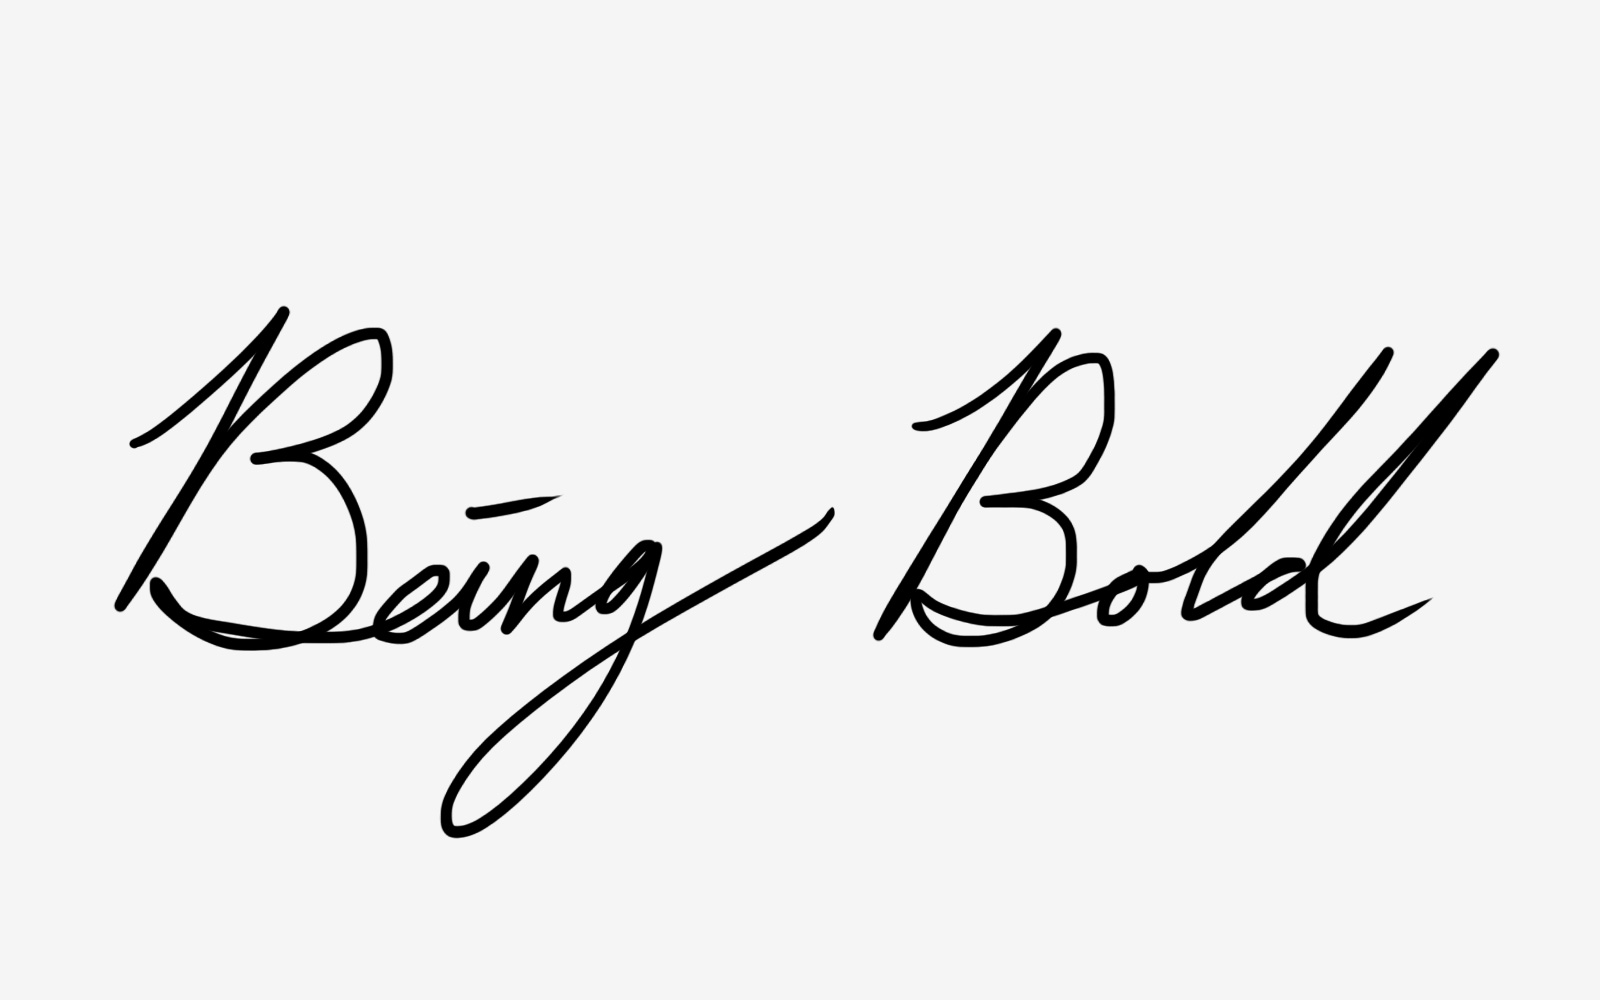 Being bold